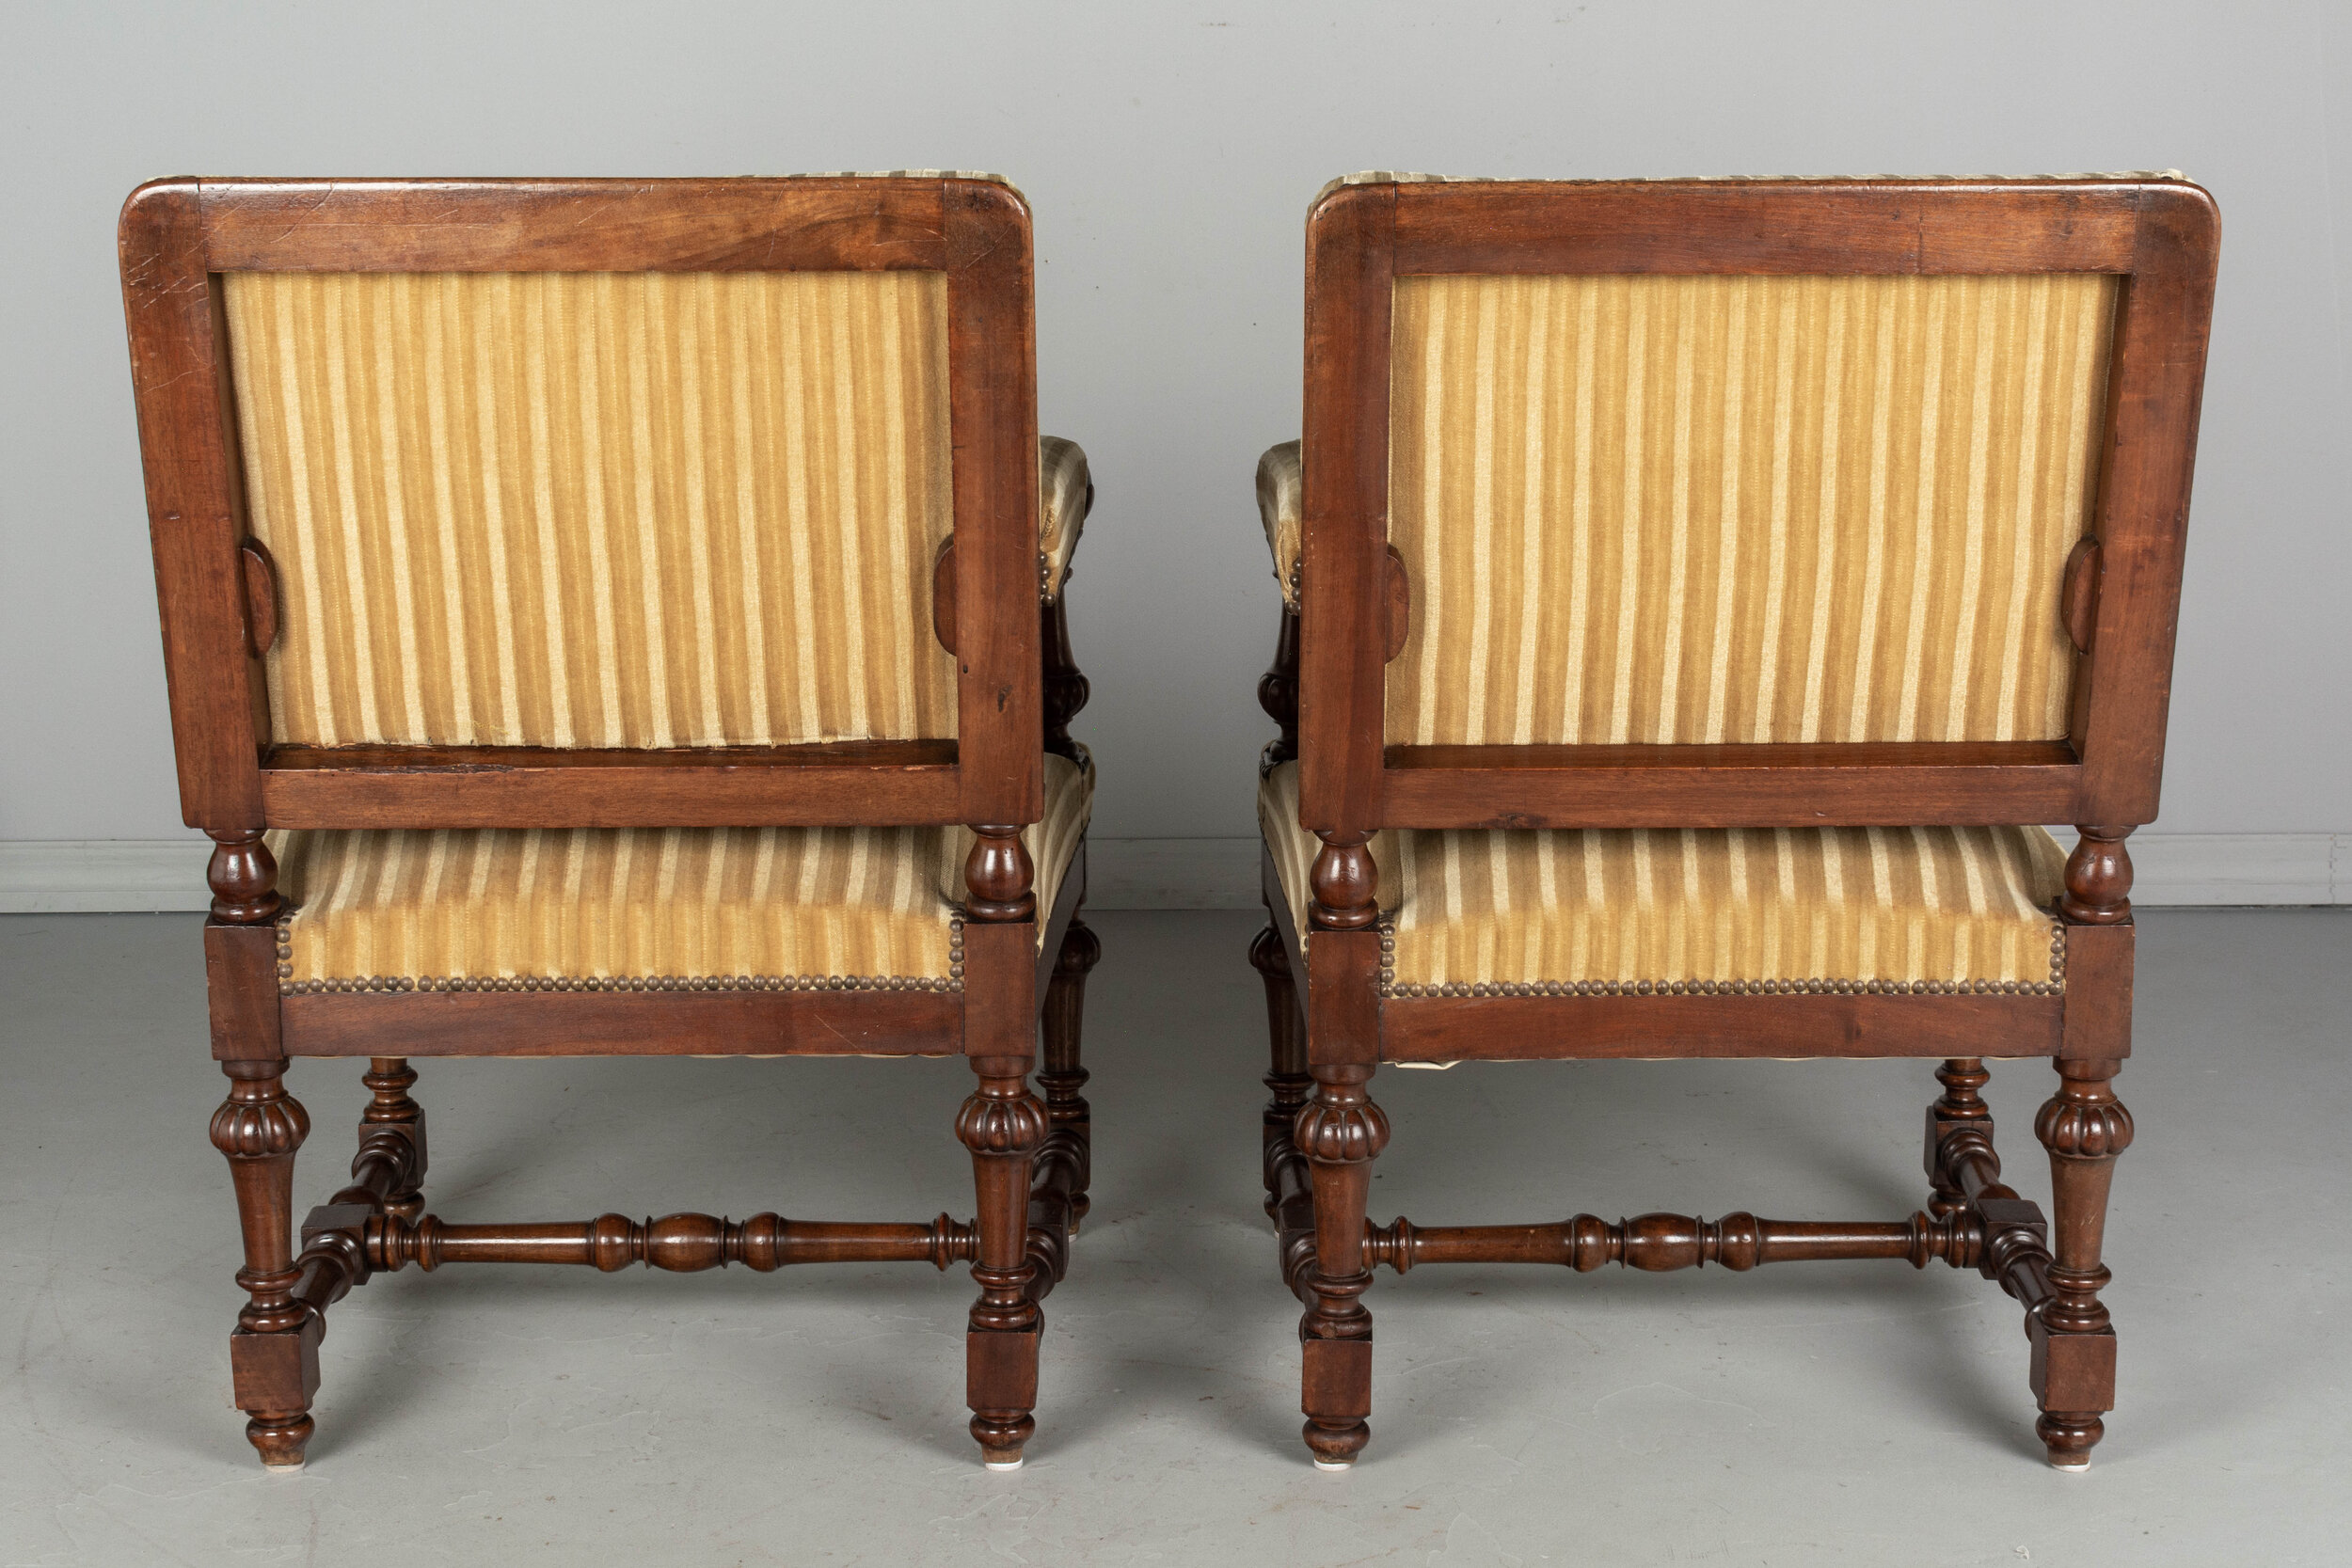 Pair of Louis XIV style chairs - Maison Felice